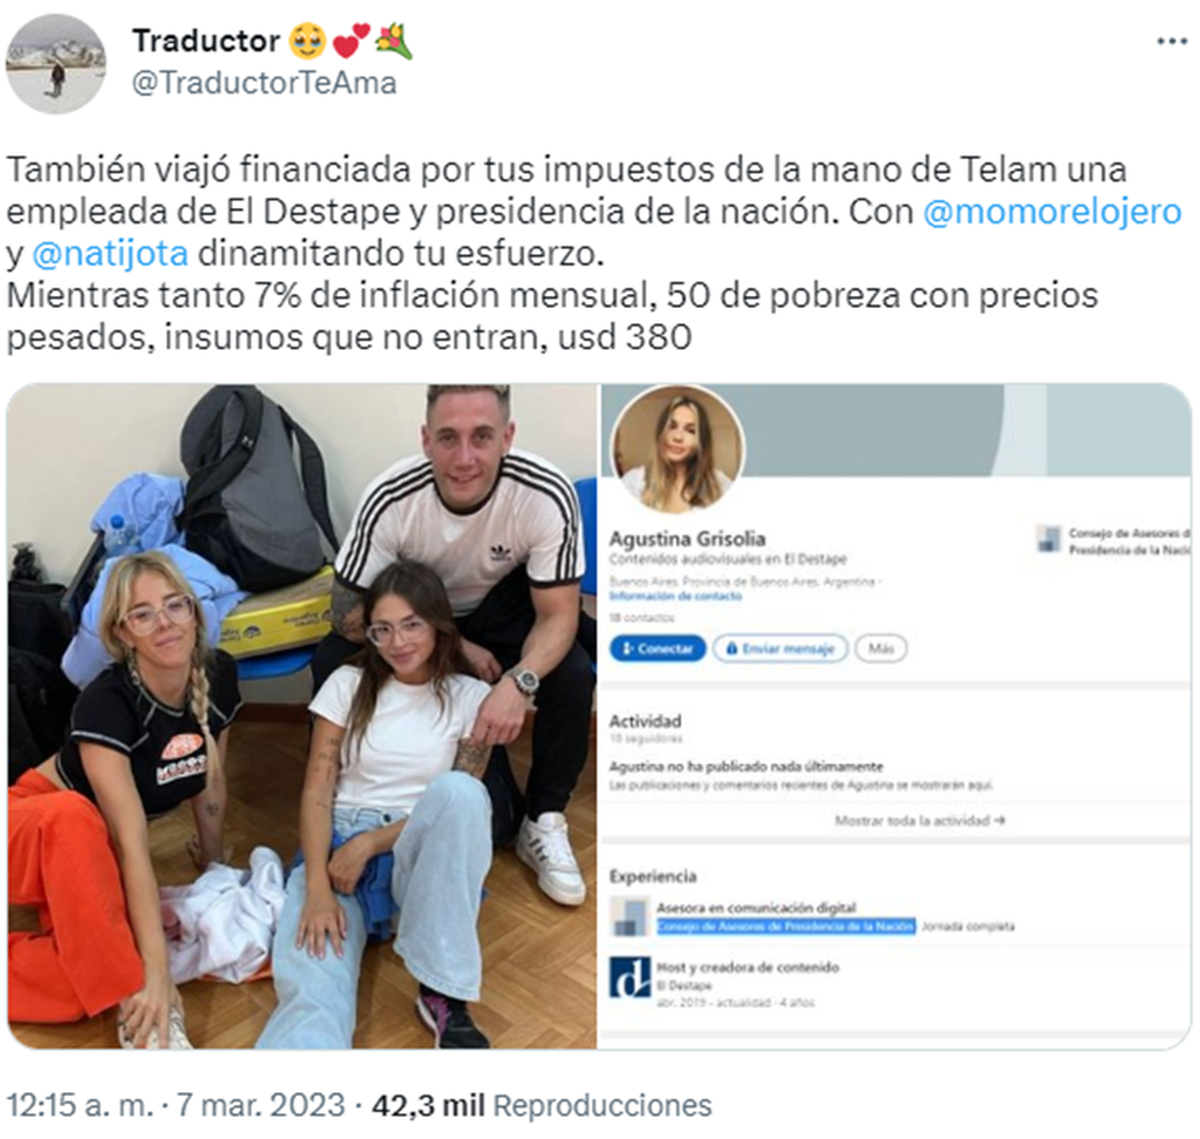 The user @TraductorTeAma was one of those who was most outraged and who denounced the alleged partisan links of the influencers. 